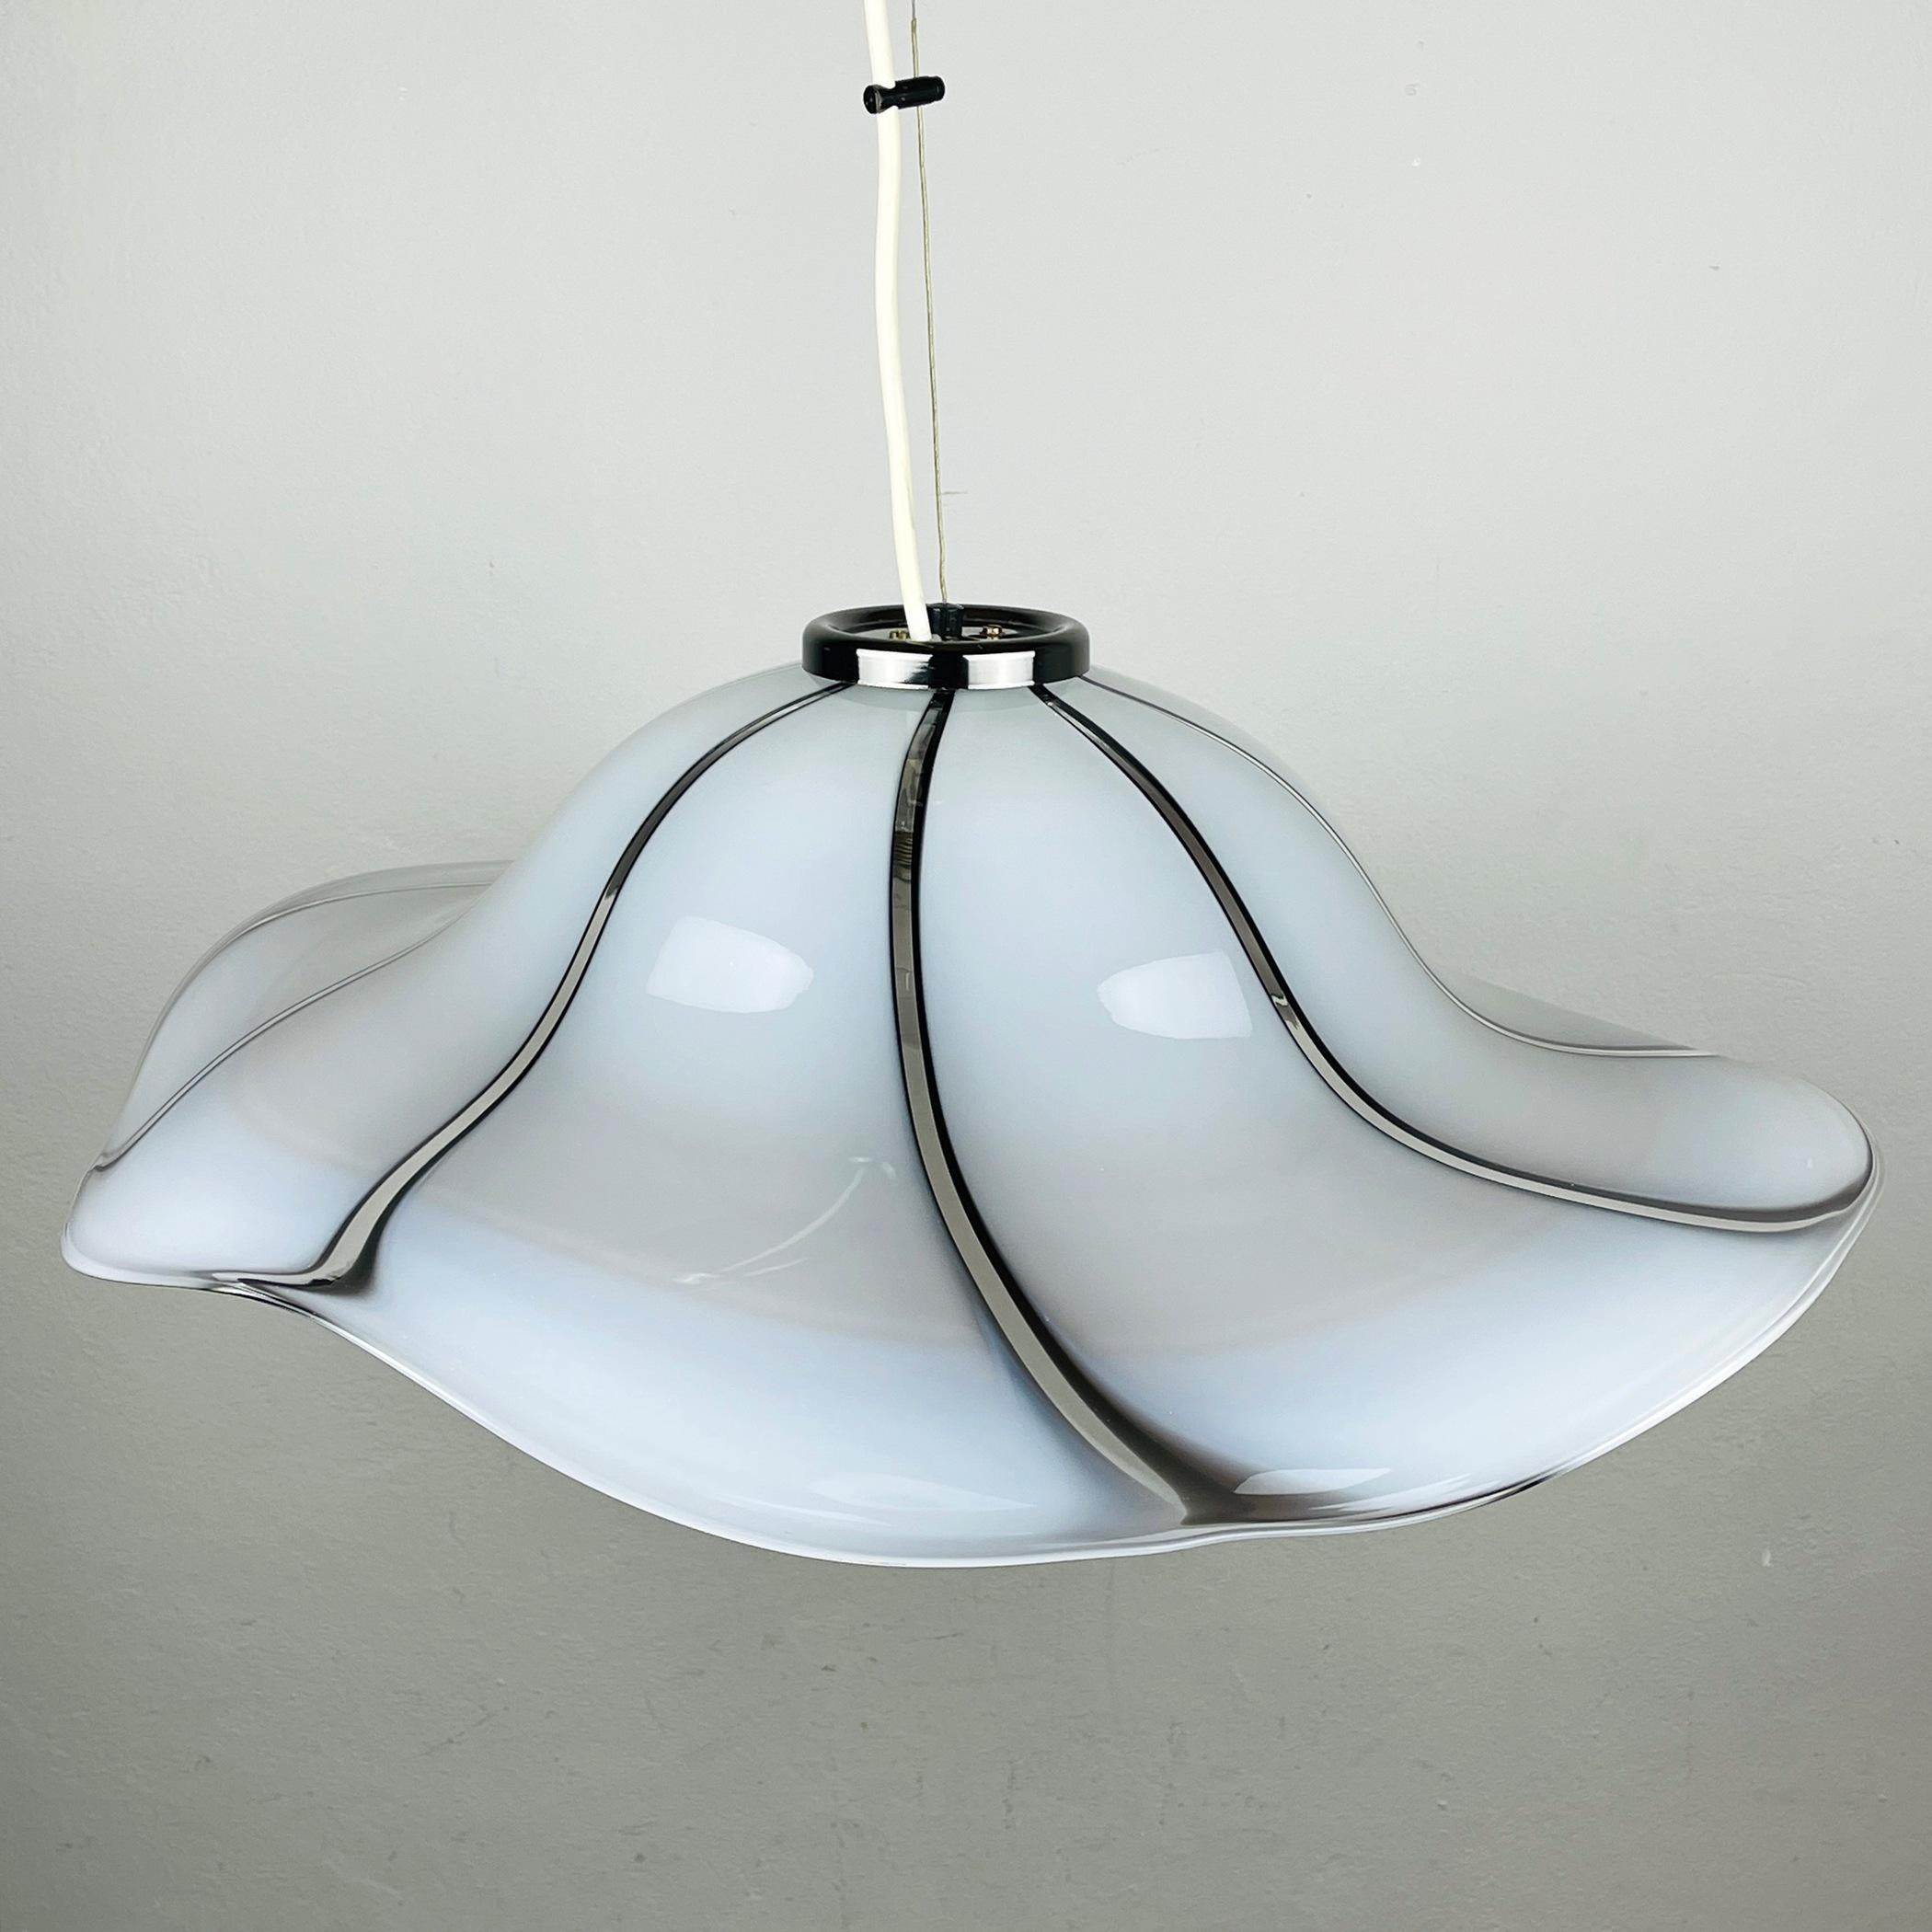 Original large impressive Murano pendant lamp made in Italy, in the 1970s. The shade of this model, also known as 'Petticoat ', resembles a large women's hat. The shade is molded by hand. The lamp also displays some true Murano craftsmanship. These